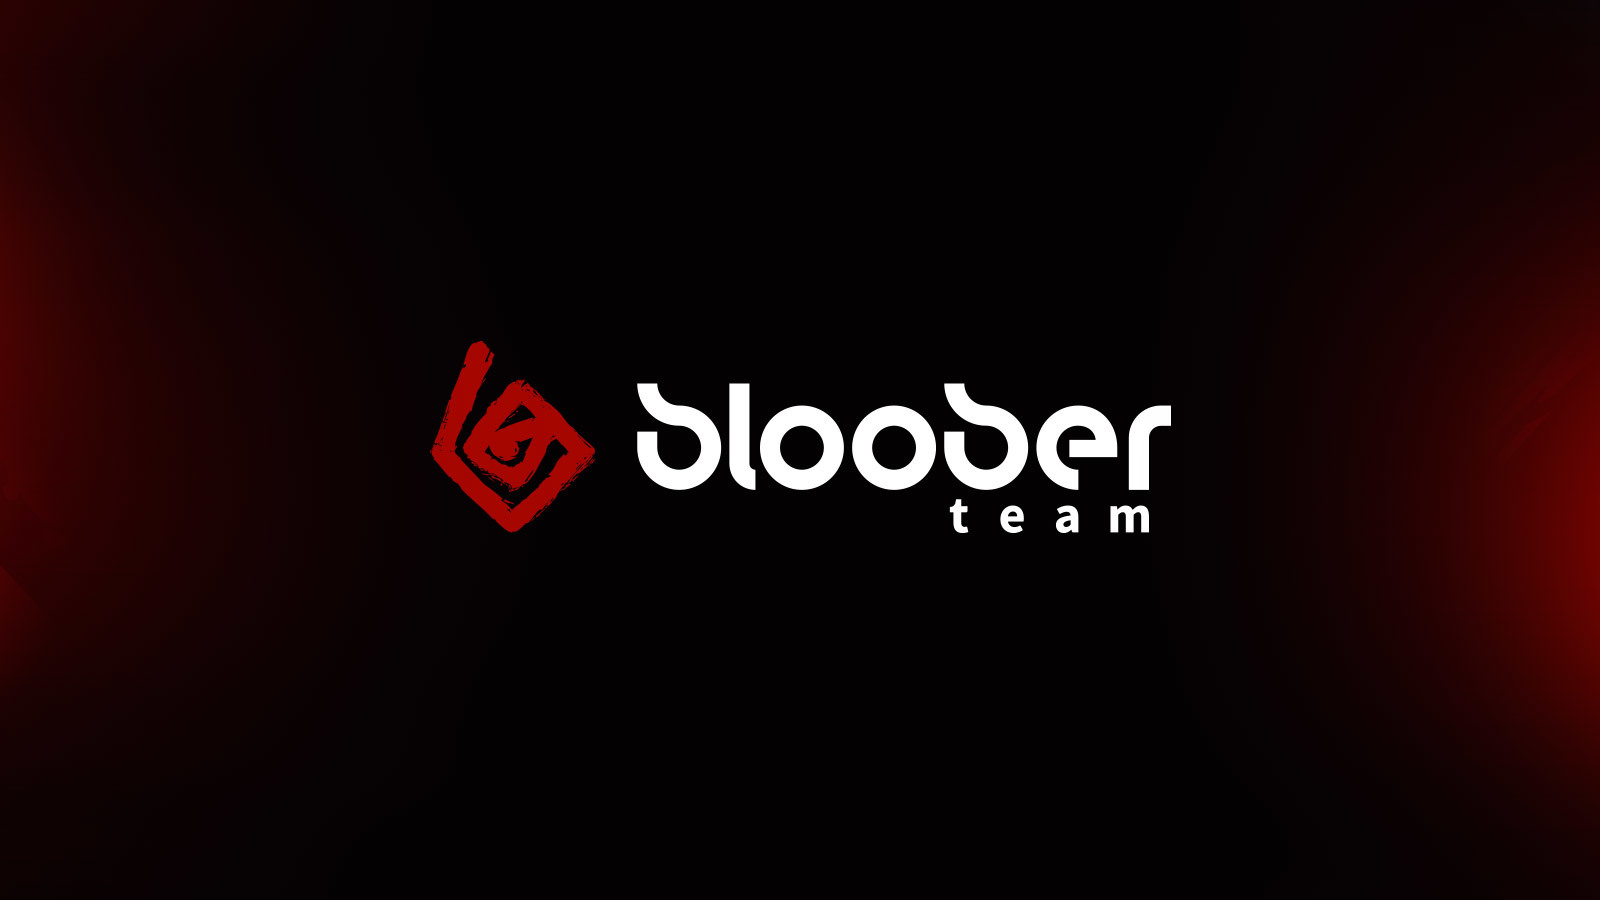 Team Bloober teams up with Skybound Entertainment on a new game –